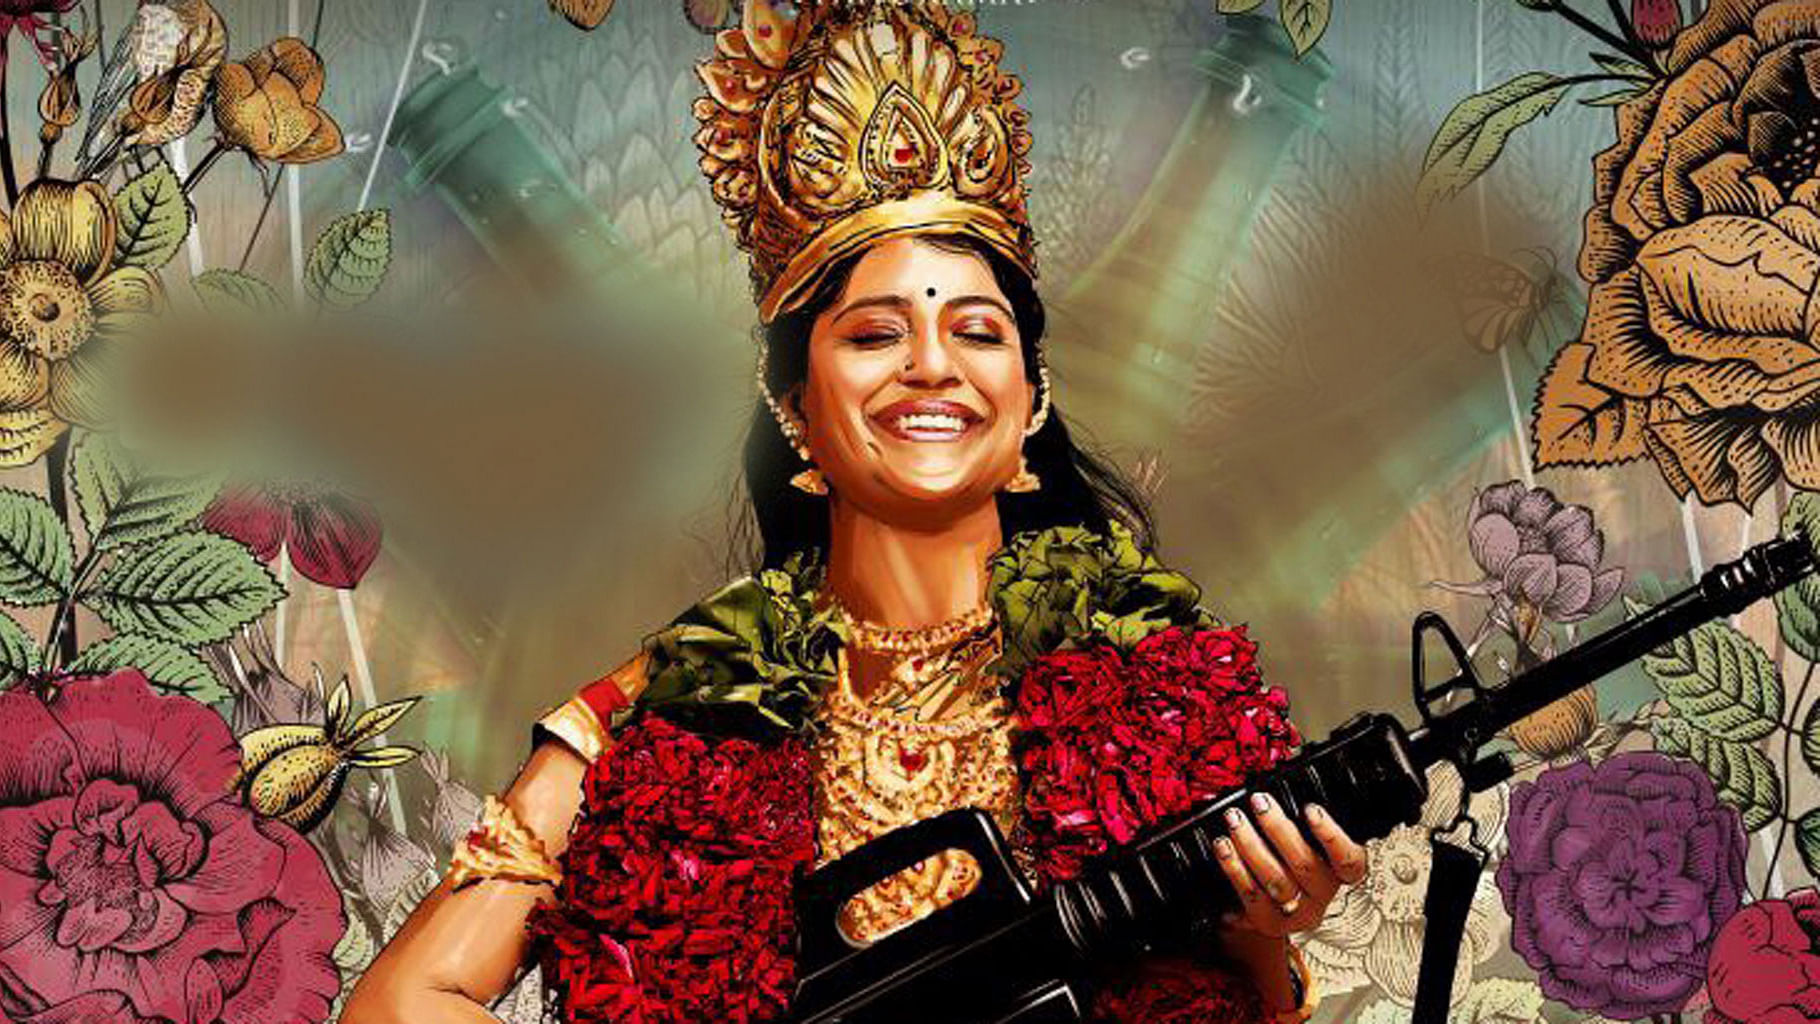 <i>Aruvi</i> is avante garde. Debutante director Arun Prabhu leads an entire cast and crew of debutantes to victory